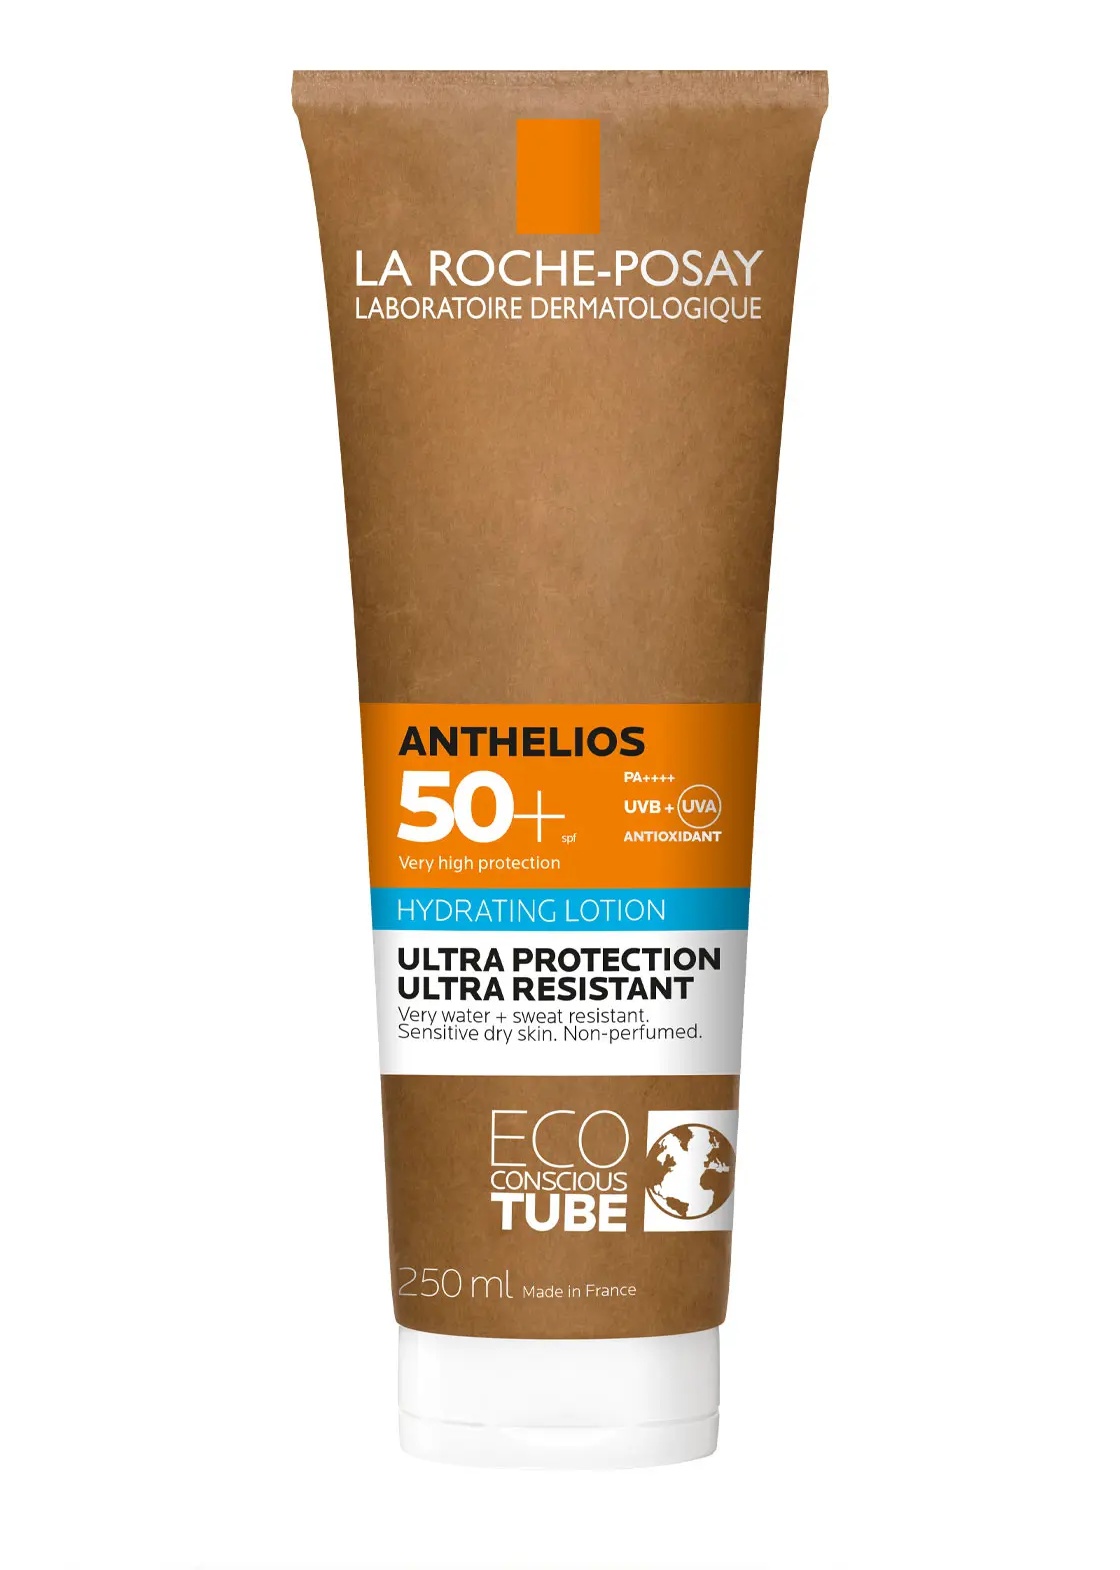 La Roche-Posay Anthelios 50+ Hydrating Lotion Ultra Protection